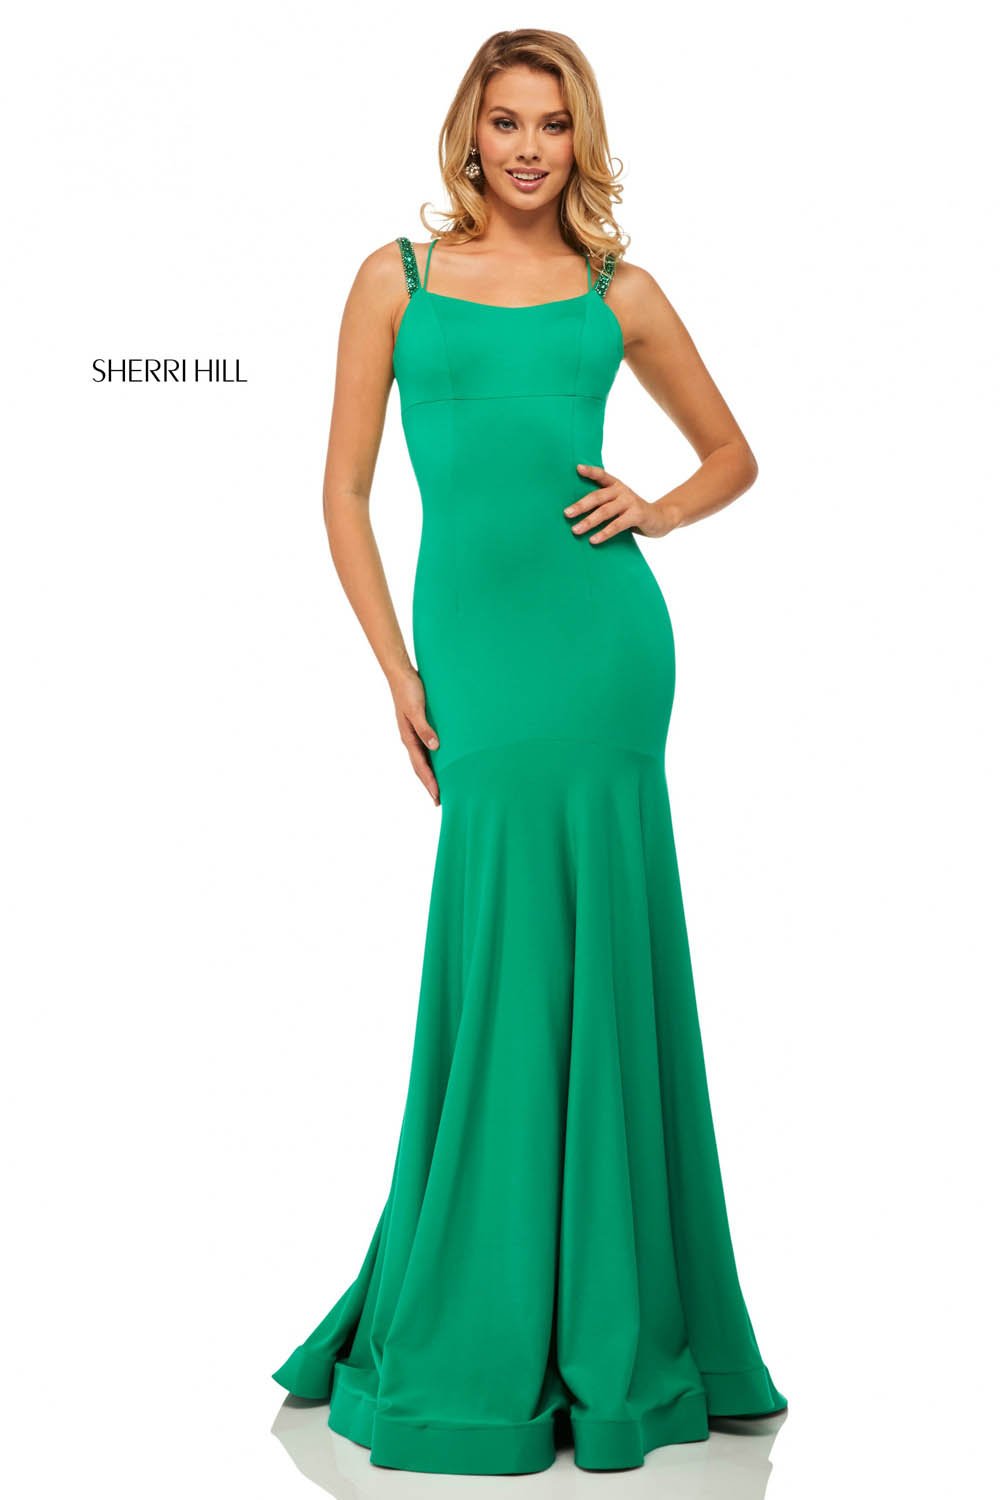 Sherri Hill 52883 dress images in these colors: Wine, Red, Emerald, Black.